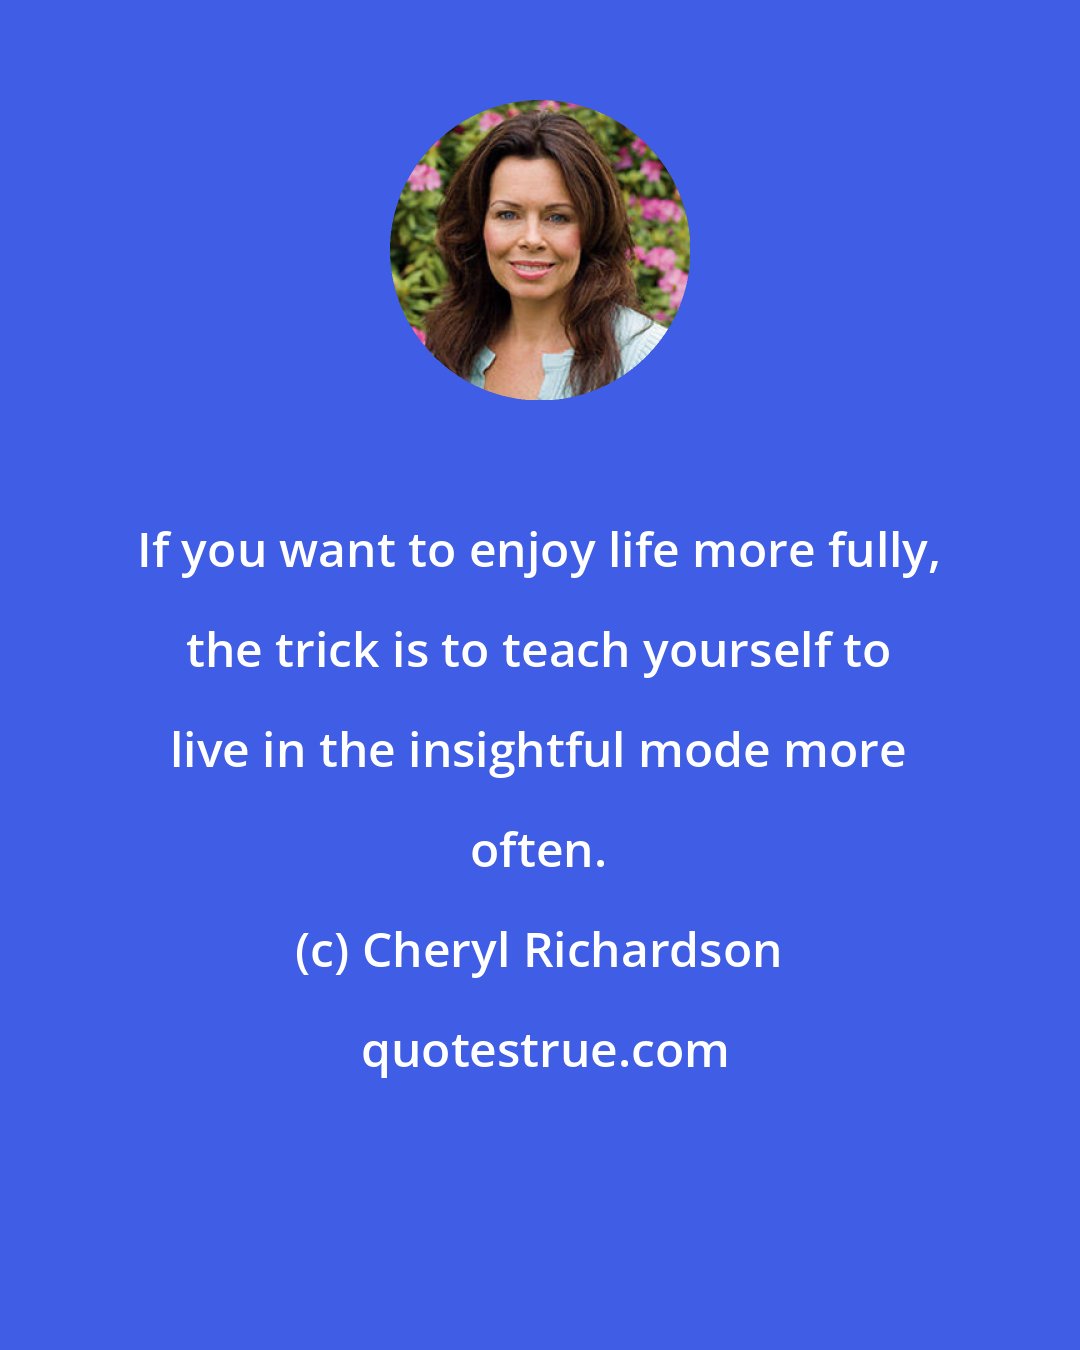 Cheryl Richardson: If you want to enjoy life more fully, the trick is to teach yourself to live in the insightful mode more often.